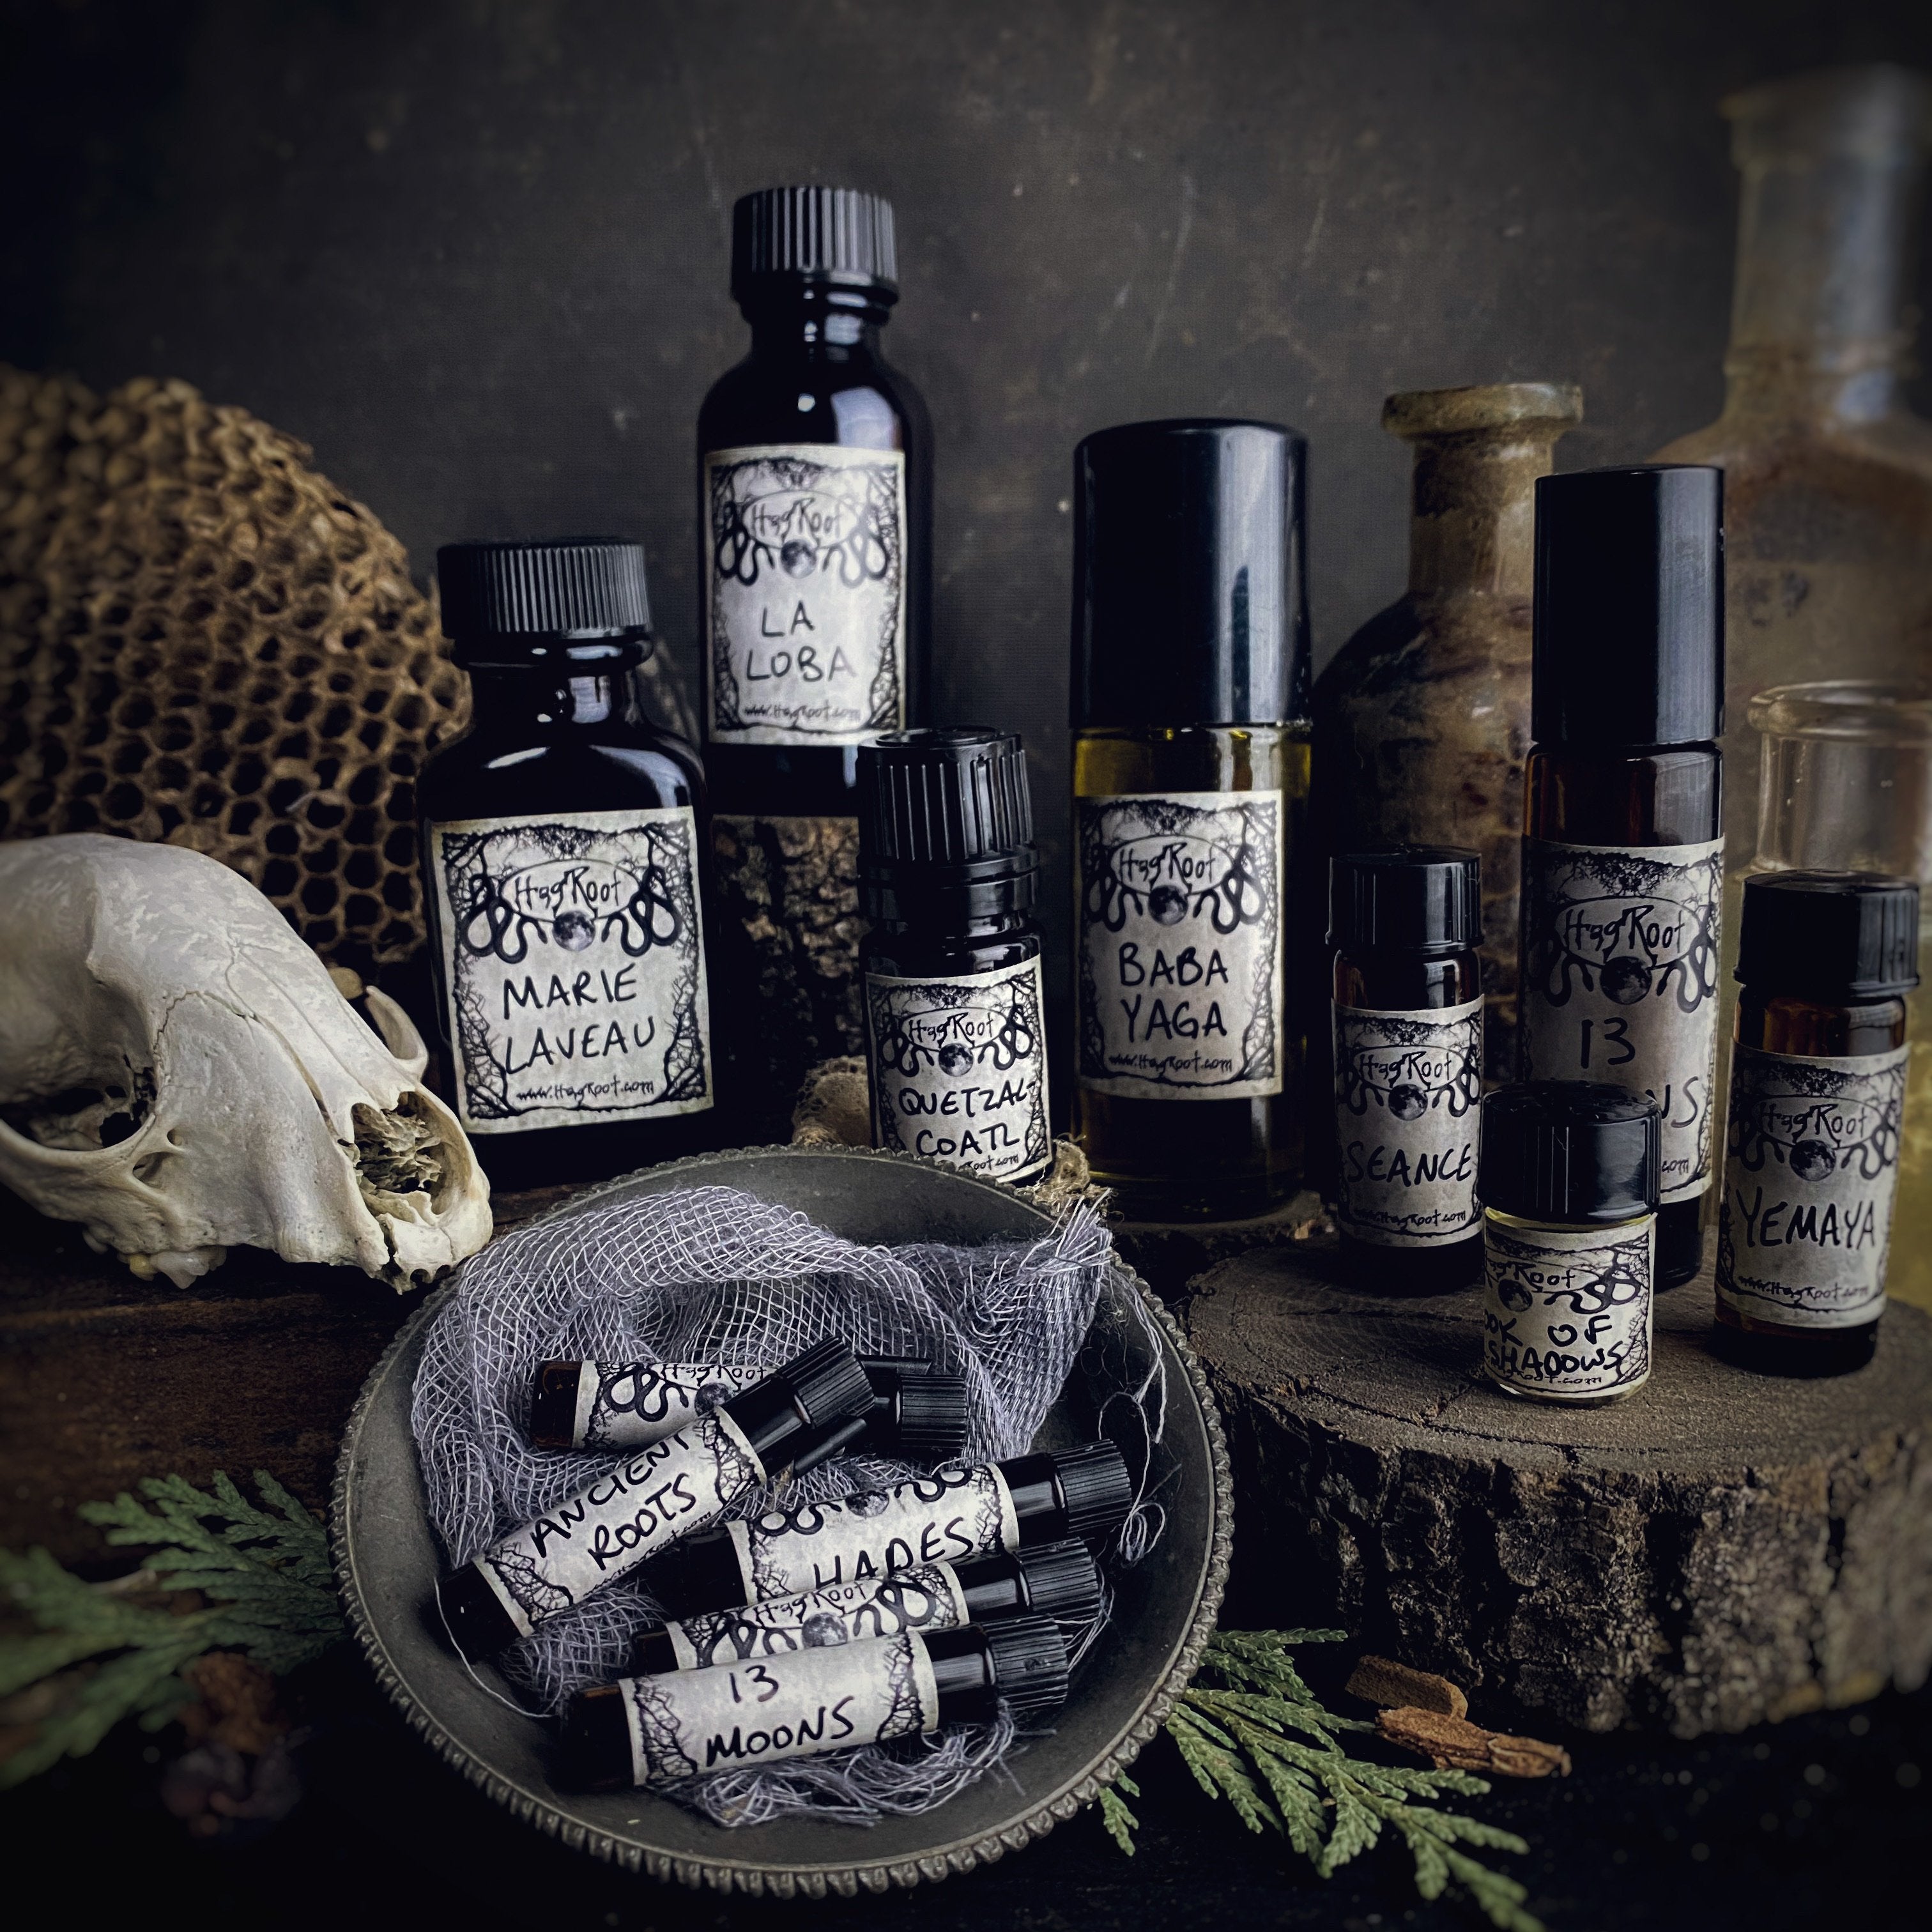 BANSHEE-(Sacred Spices, Dark Cacao, Musk, Agarwood, Amber Resin, Fig)-Perfume, Cologne, Anointing, Ritual Oil